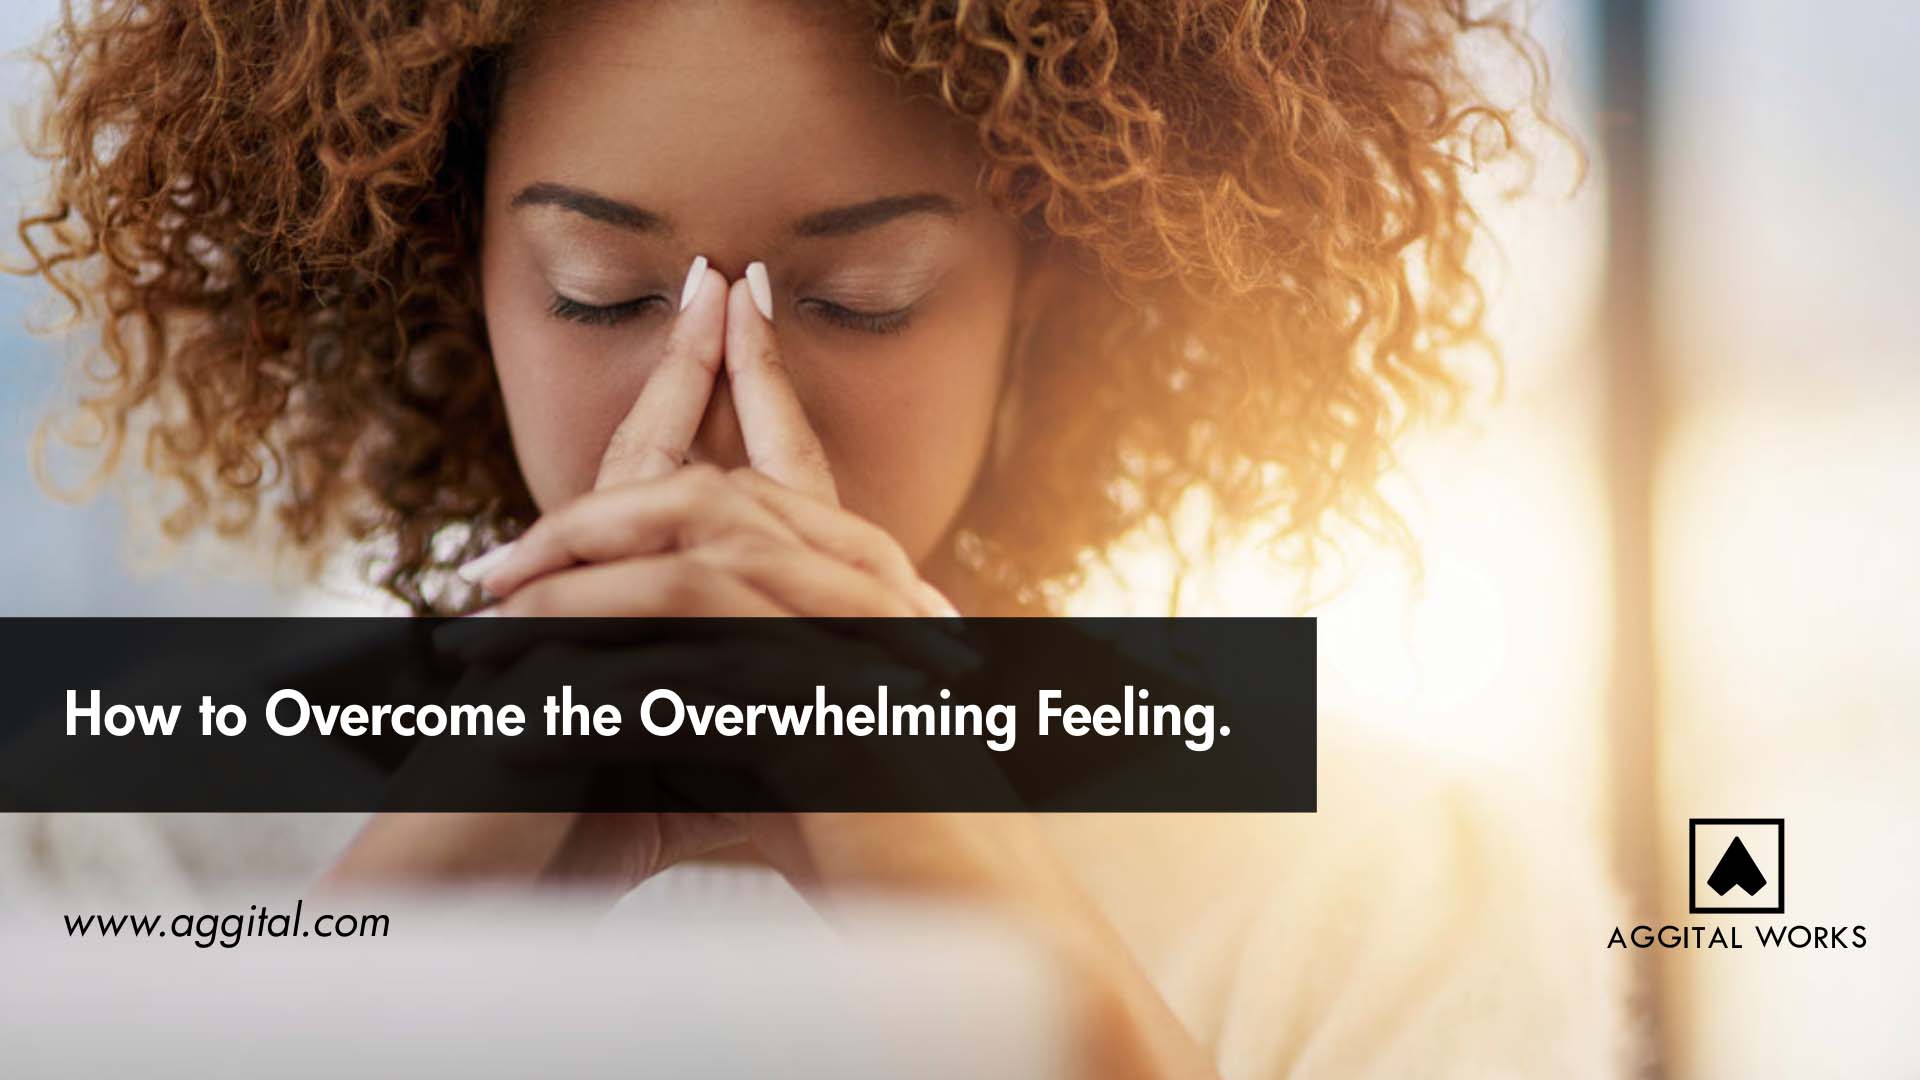 How to Overcome the Overwhelming Feeling